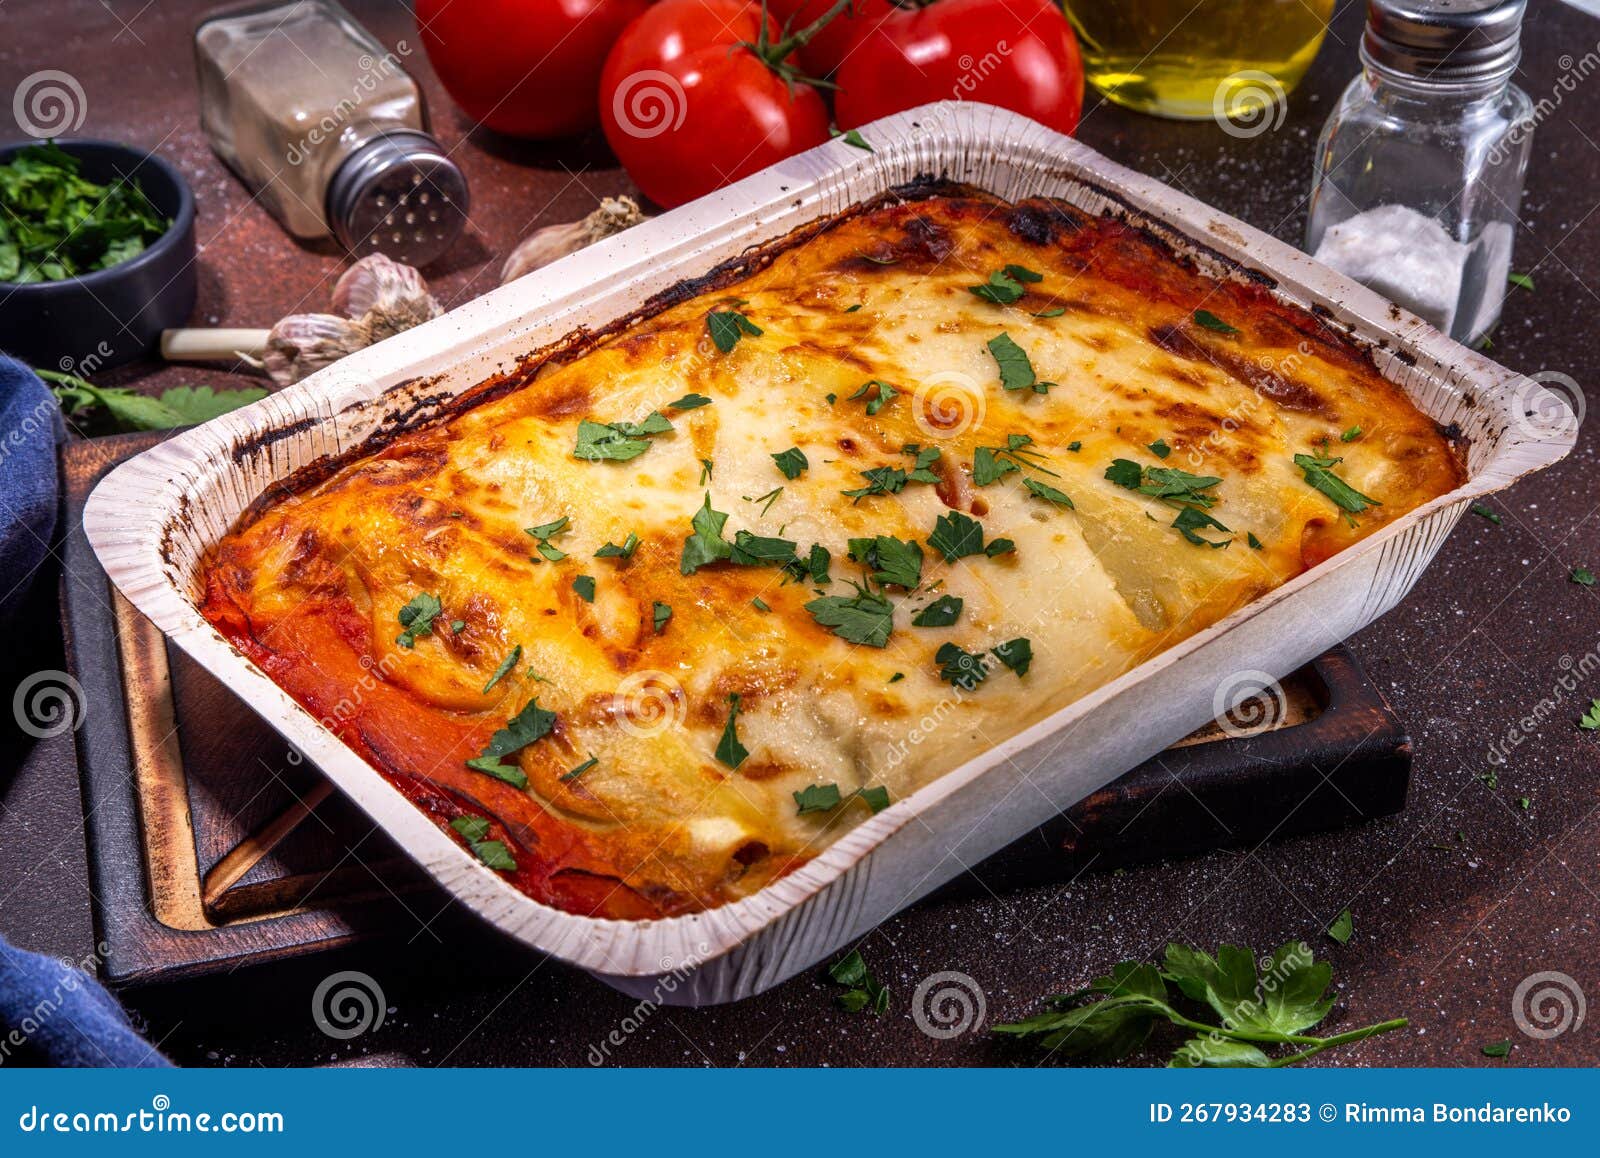 Homemade Cannelloni Pasta with Meat Stock Image - Image of healthy ...